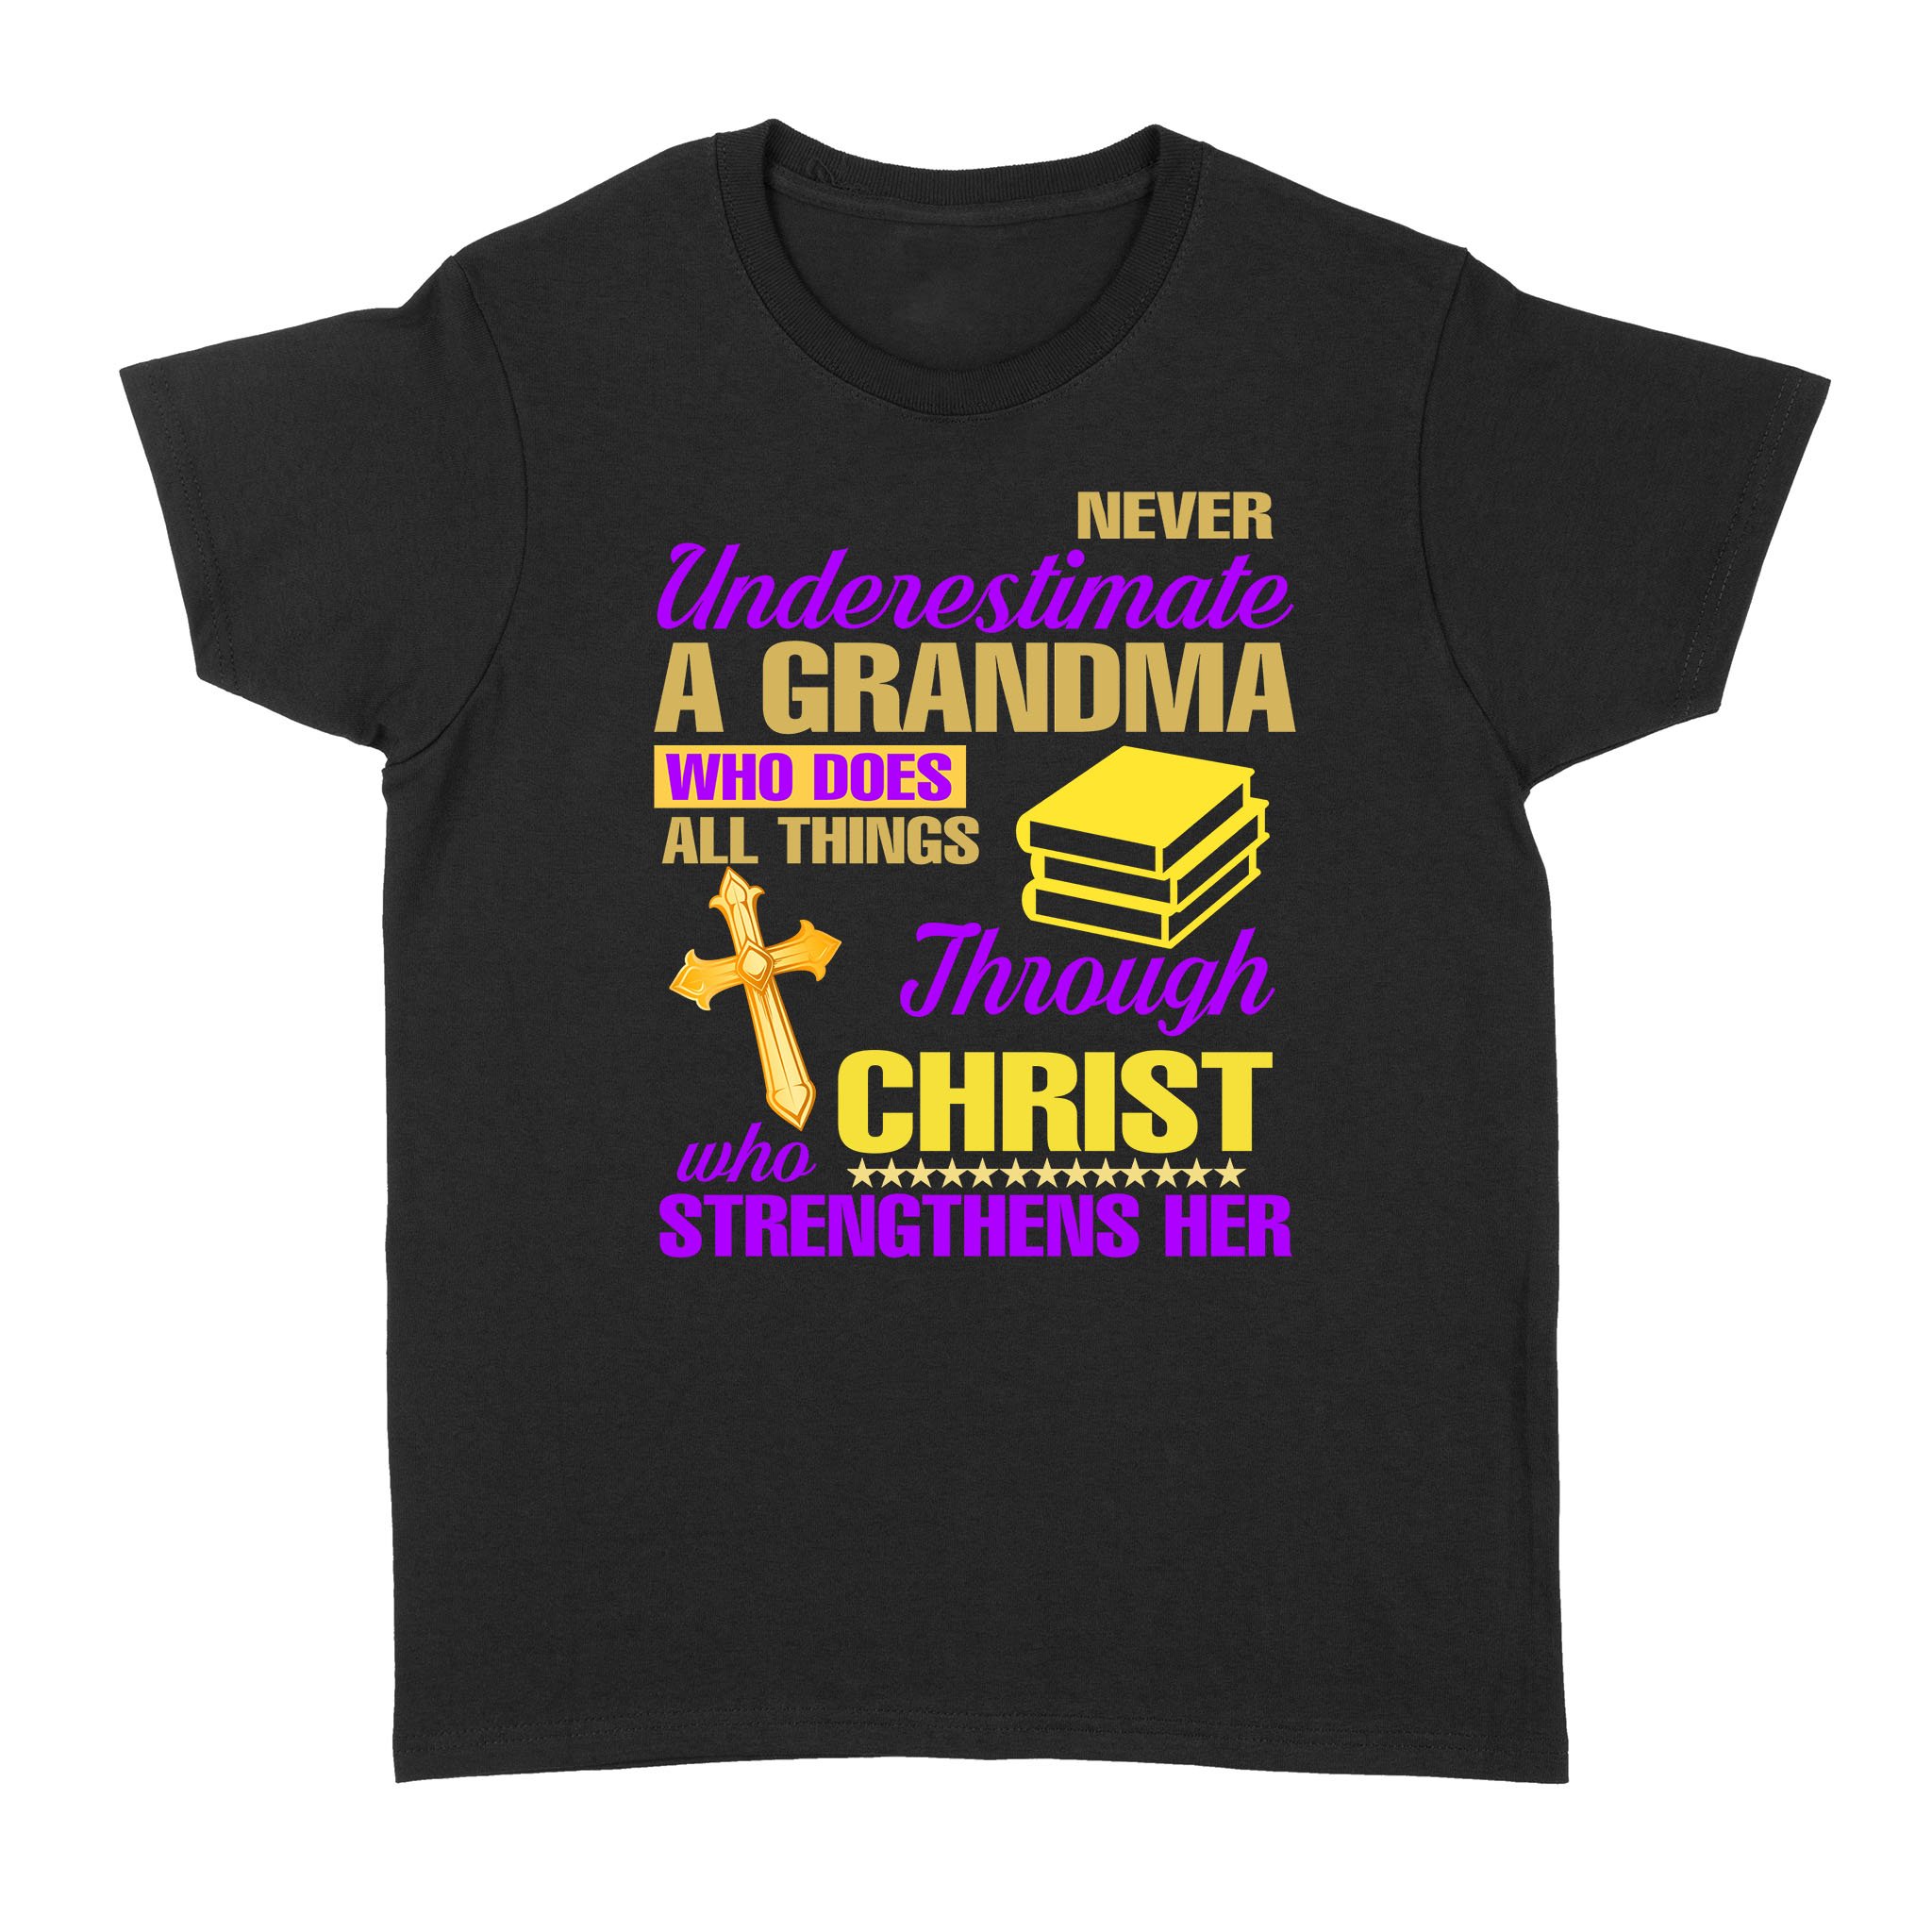 Never Underestimate A Grandma Who Does All Things Through Christ Who Strengthens Her Shirt – Standard Women’s T-shirt